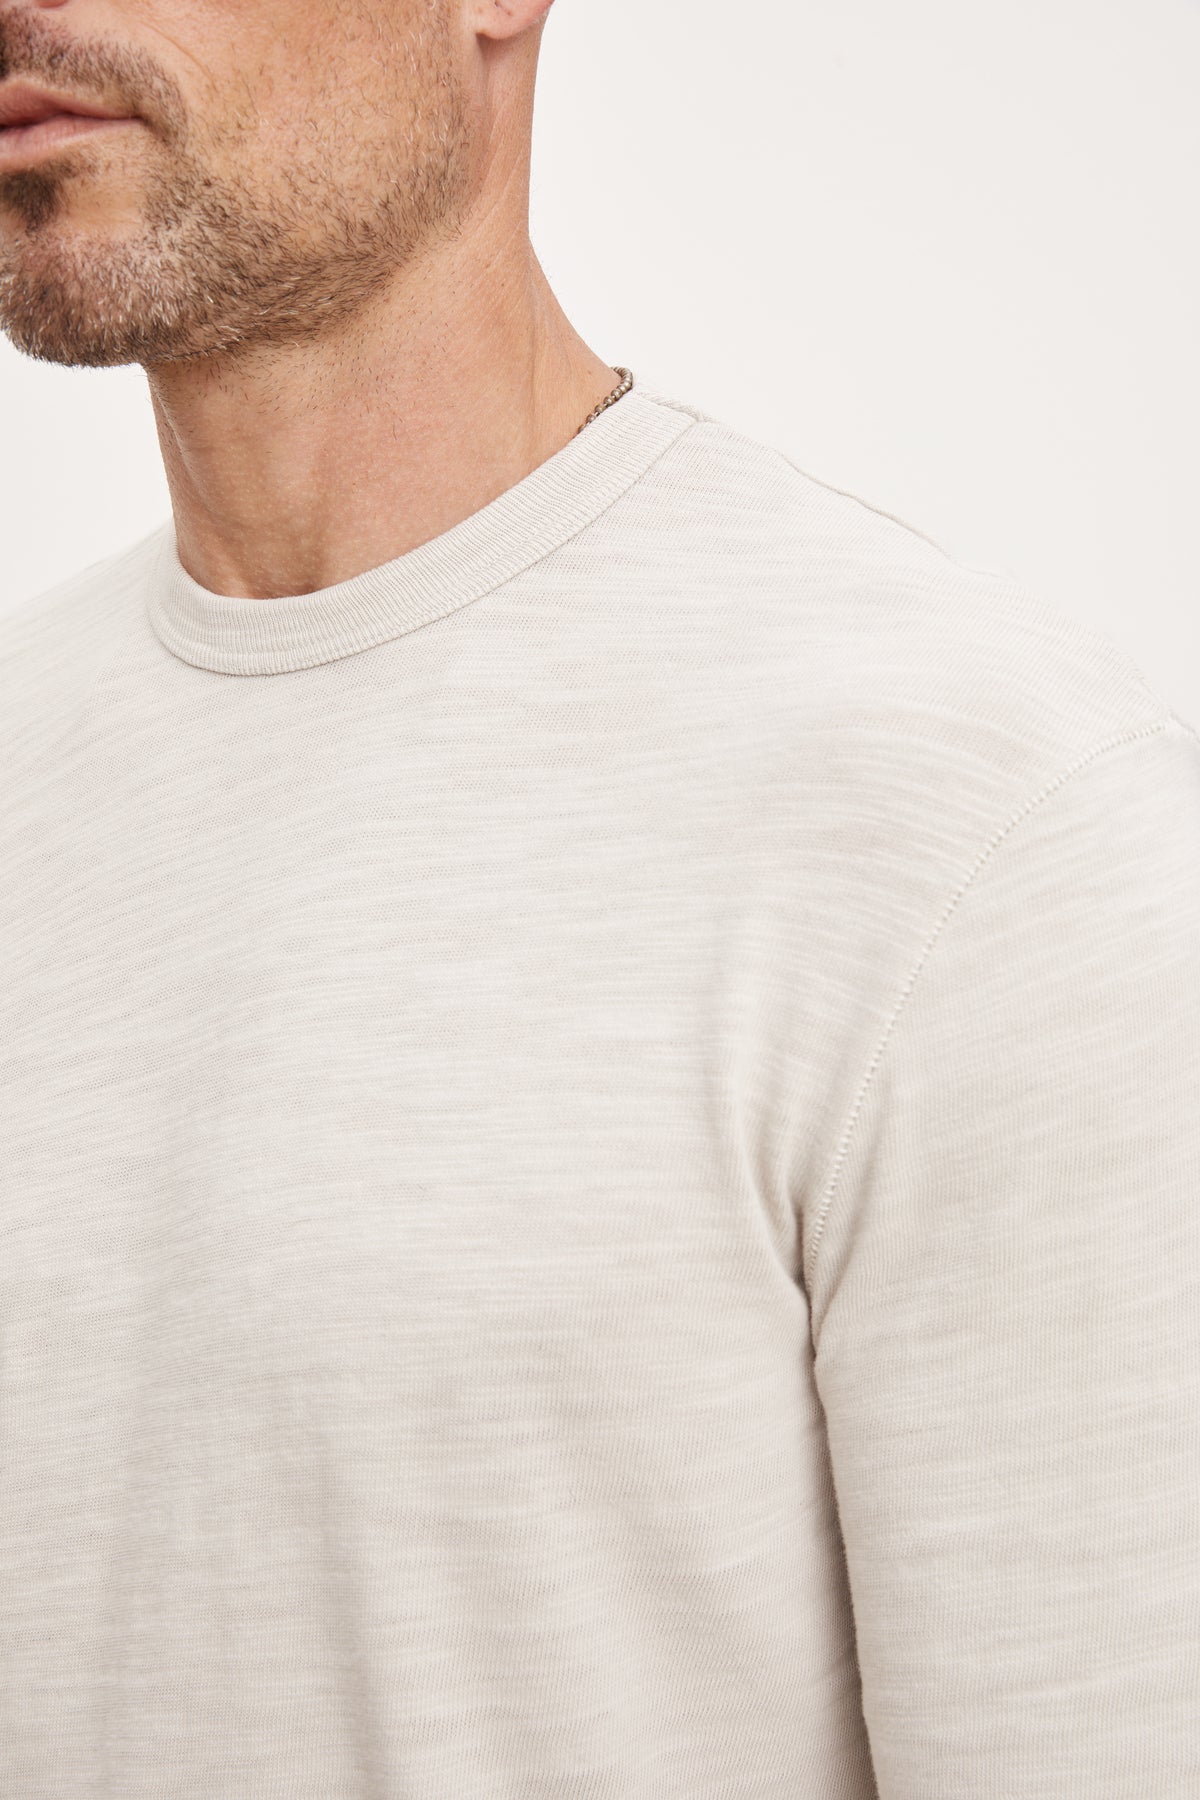   A man wearing a Velvet by Graham & Spencer Palmer Crew Neck Tee made of soft cotton slub knit. 